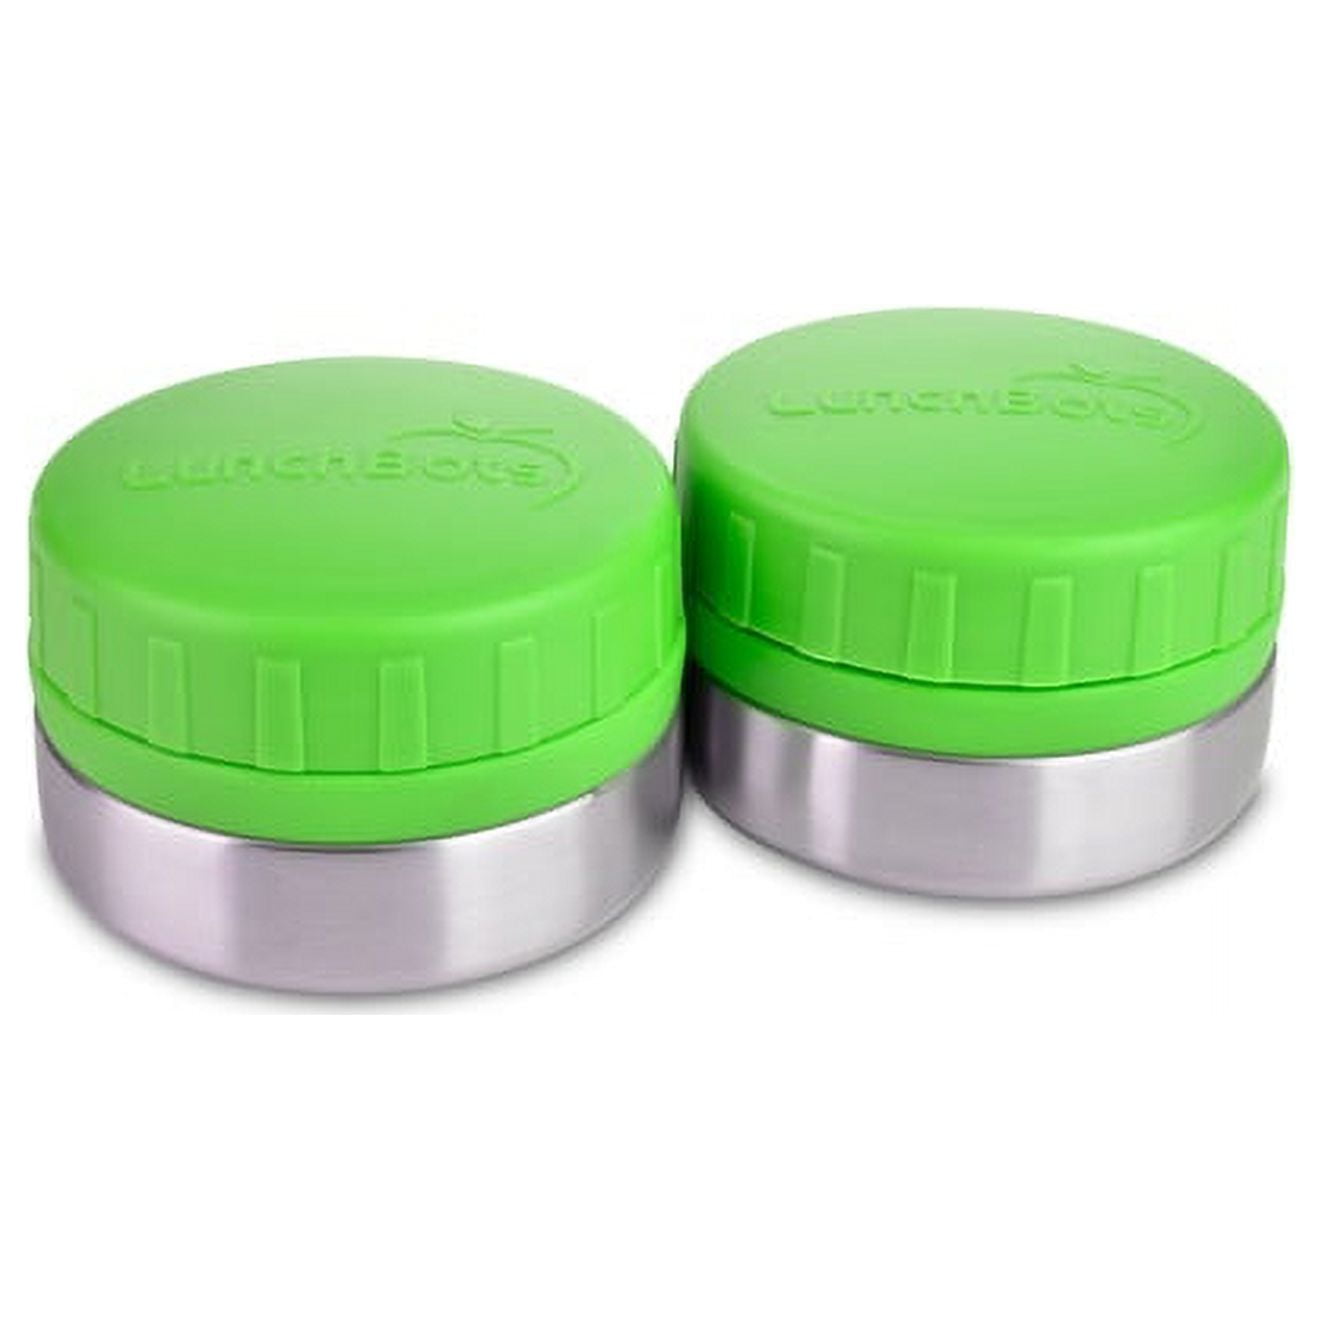 LunchBots Rounds Stainless Steel Leak Proof Food Containers Purple